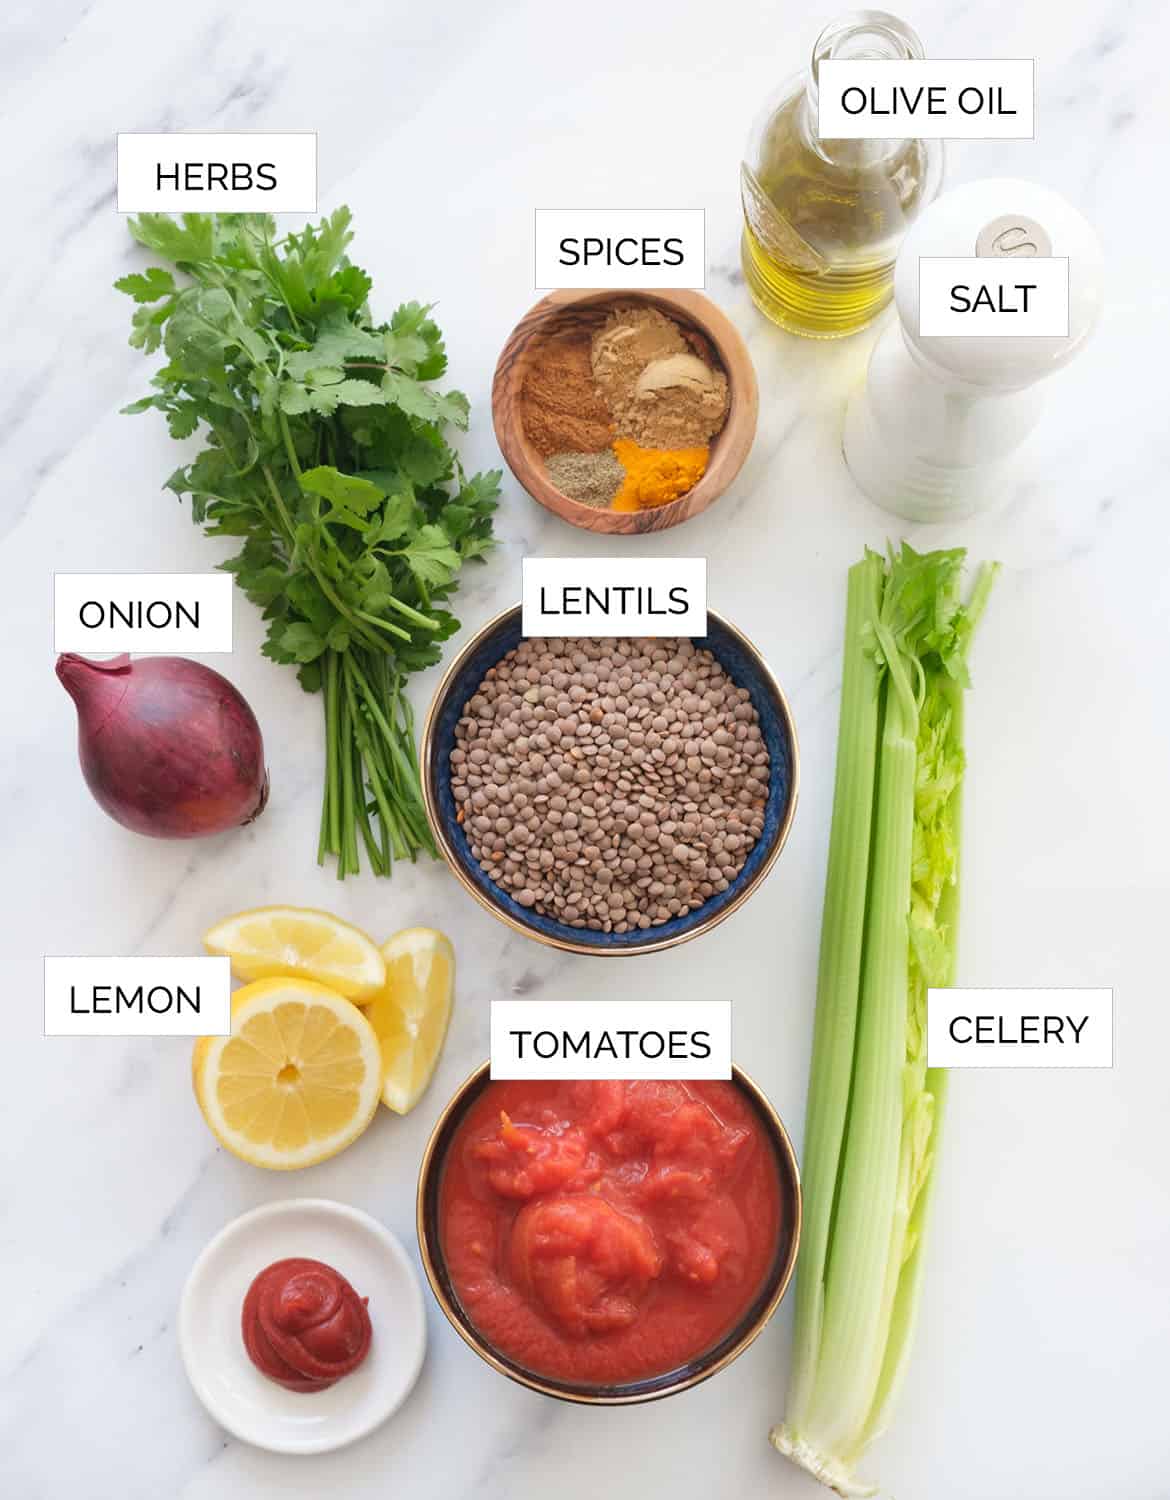 The ingredients to make this Mediterranean lentil soup are arranged over a white background.